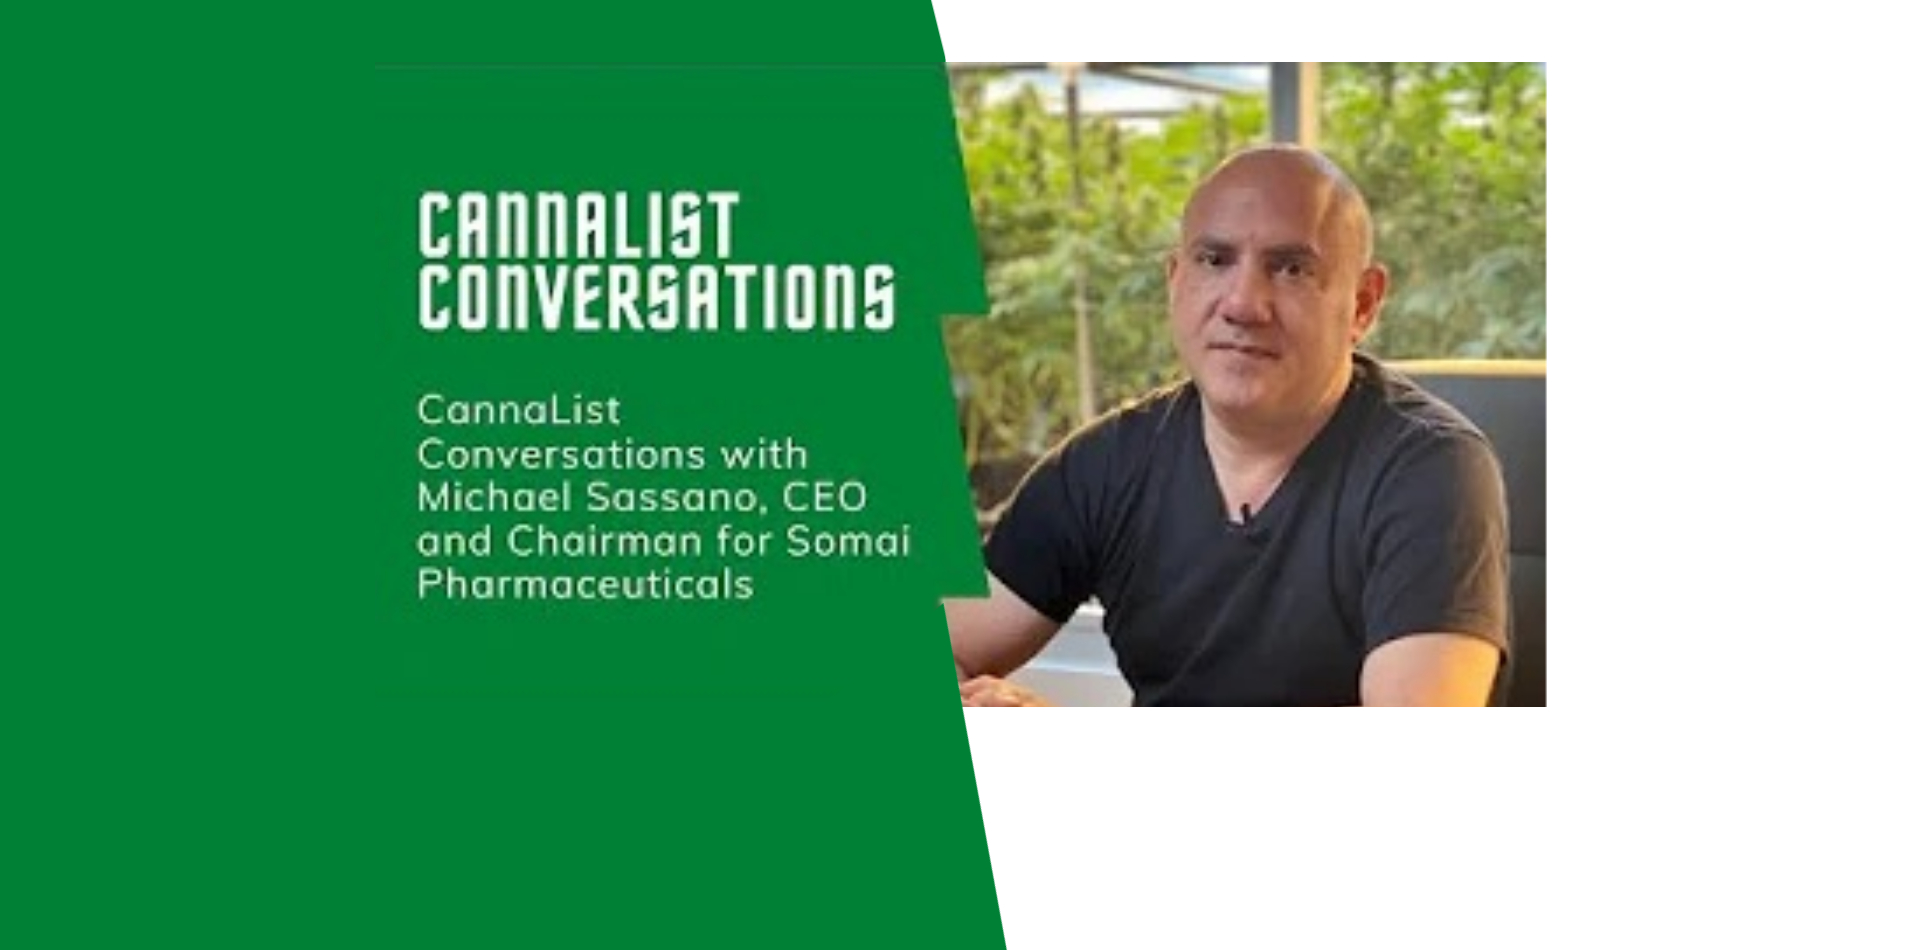 CannaList Conversations with Michael Sassano, CEO and Chairman for Somai Pharmaceuticals